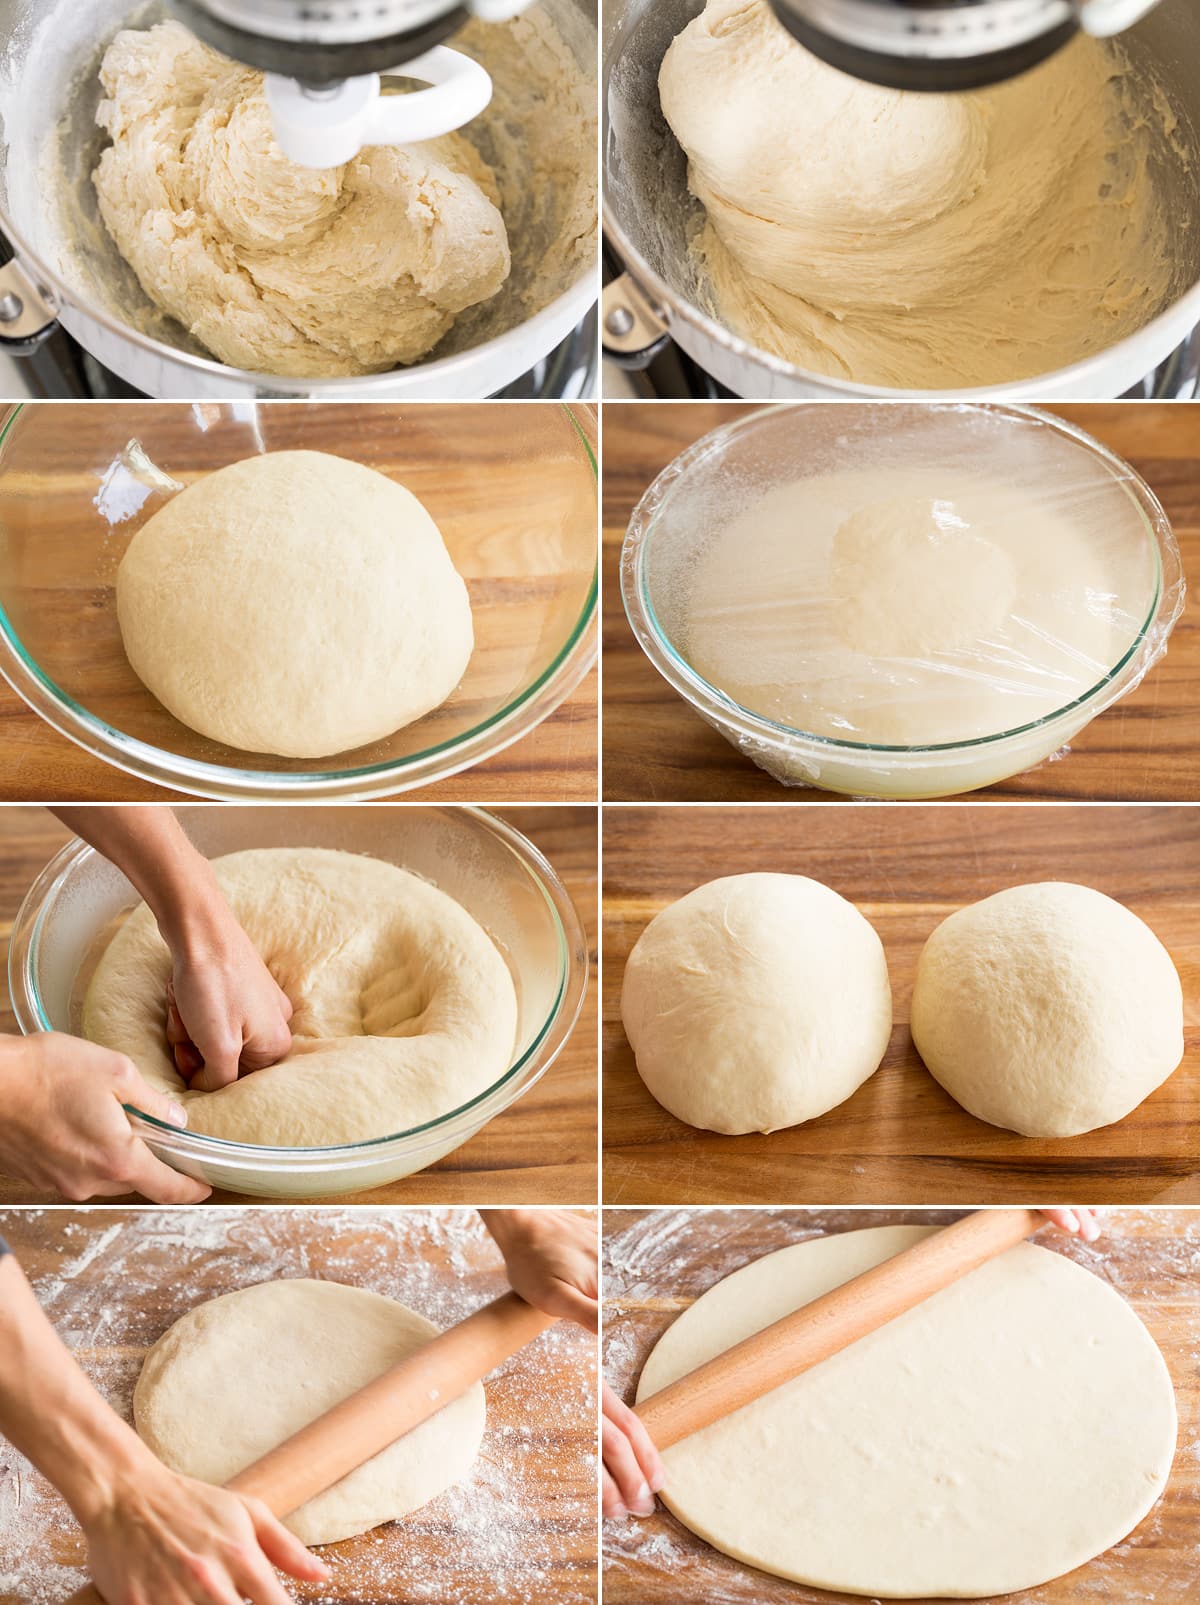 Collage of eight images showing next steps of preparing dinner rolls. Includes kneading dough until combined then until nearly smooth. Then rising dough in a bowl, punching dough down. Dividing into two portions and rolling portions into a round.